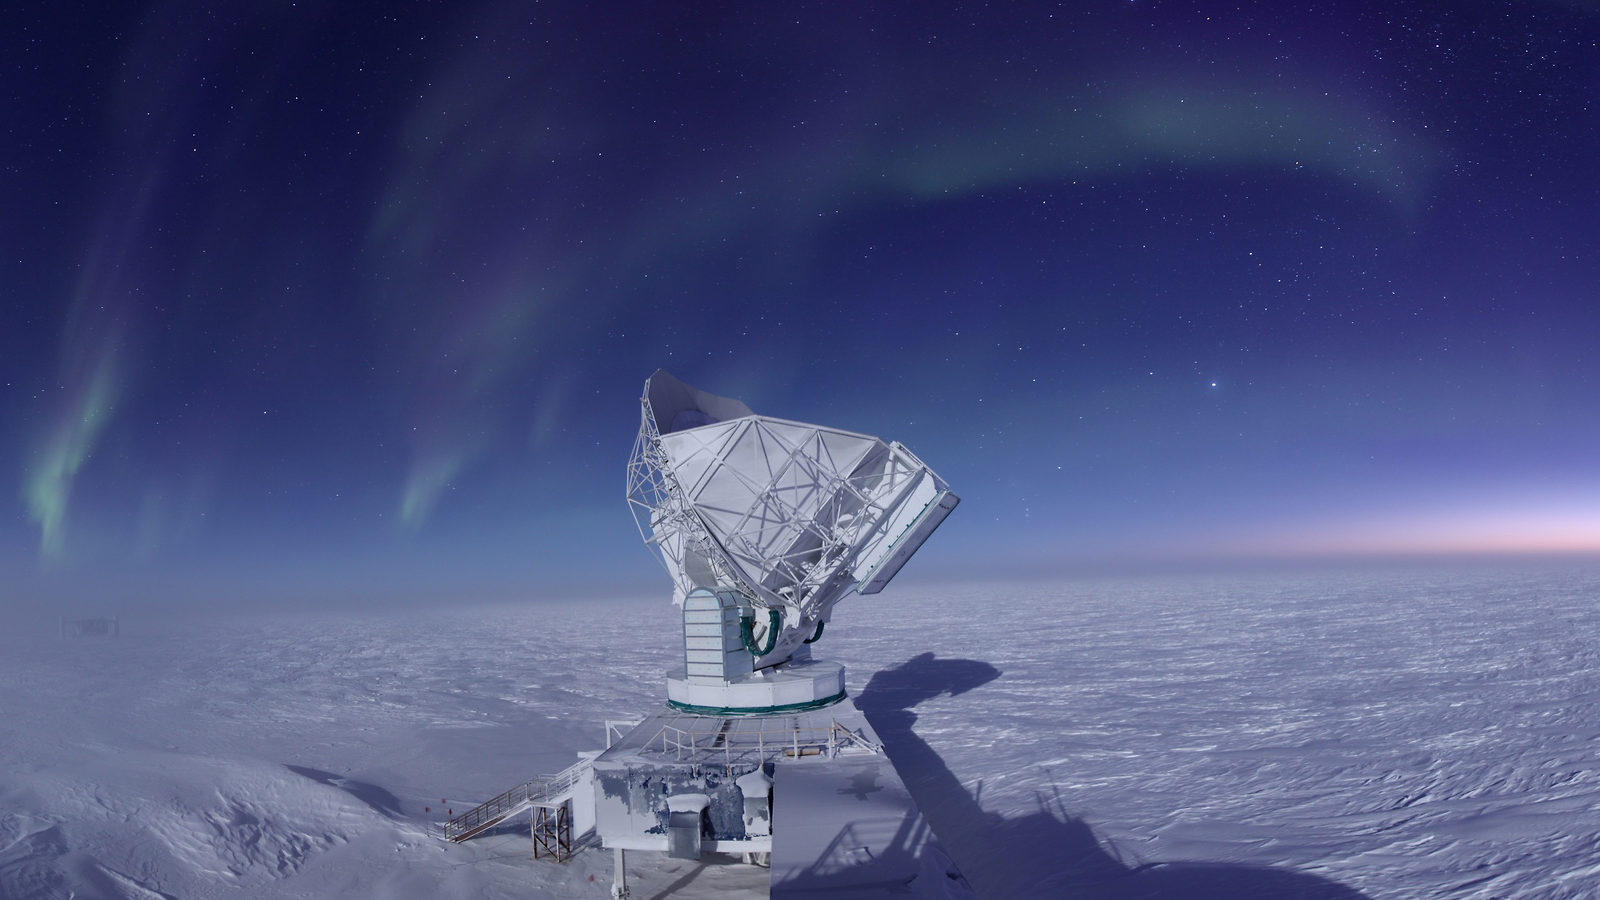 Photograph of a large telescope in the snow observing the night sky